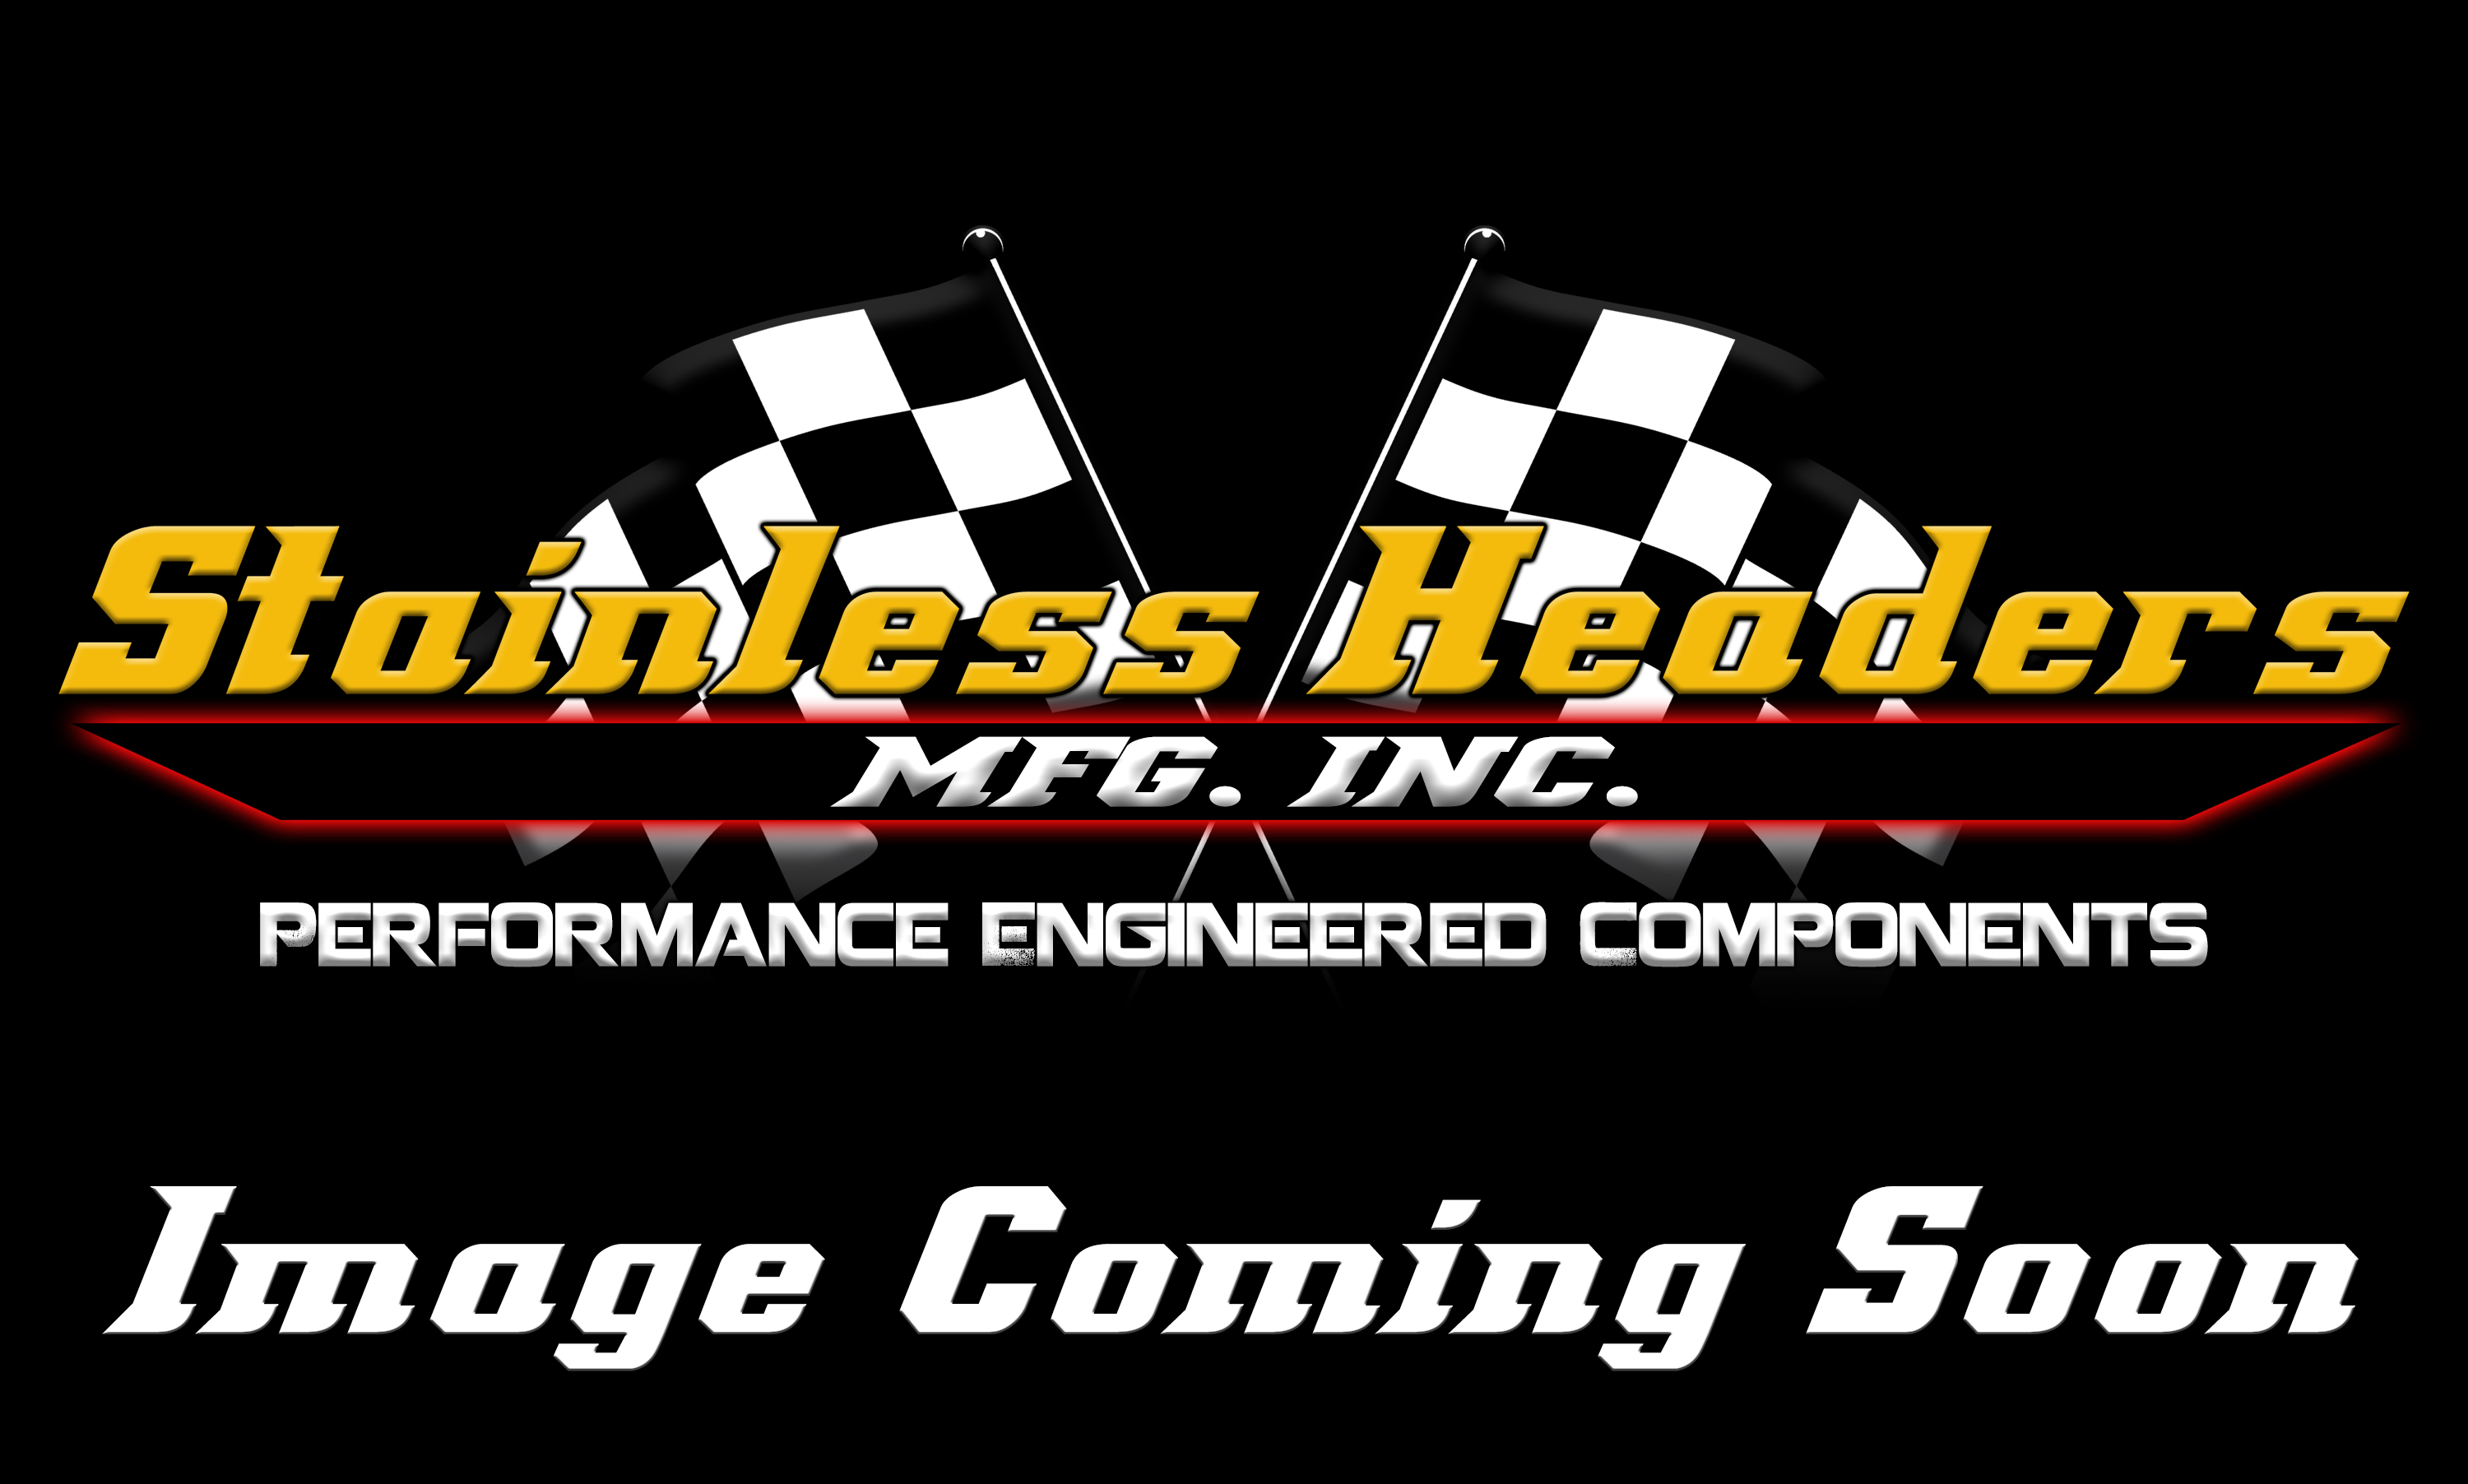 Stainless Headers - 2 1/2" Primary 8 into 1 Performance Merge Collector-18ga 304ss